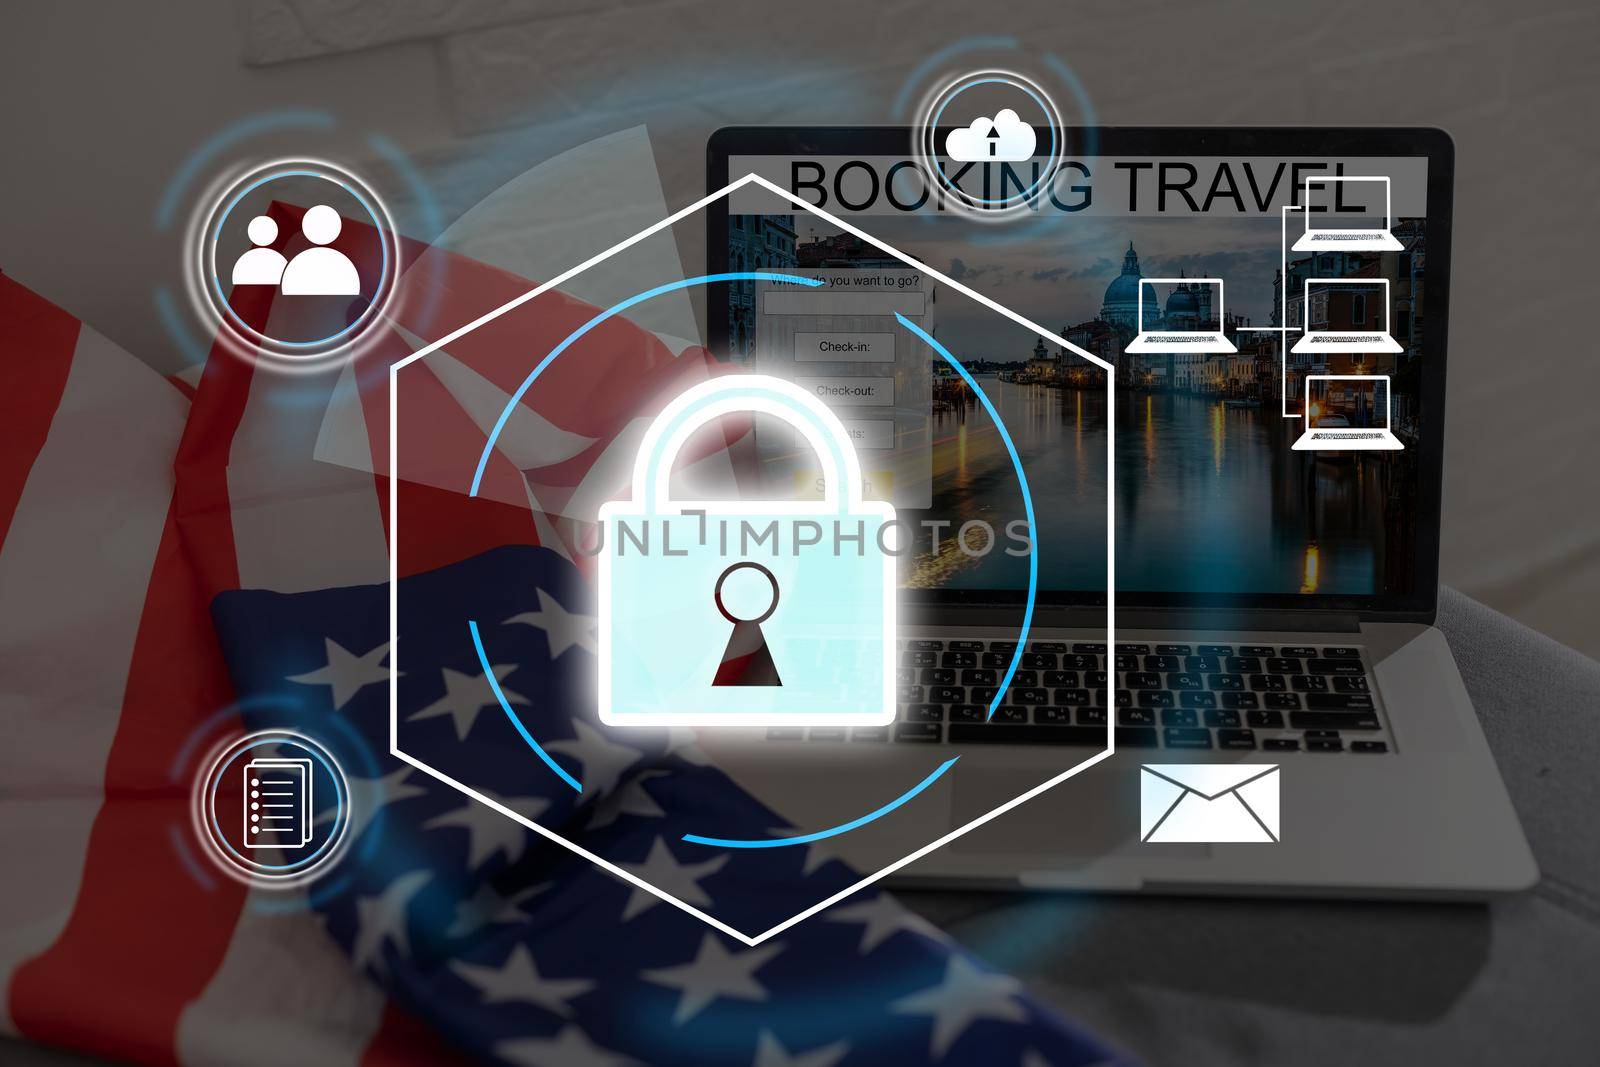 Virtual creative lock symbol and microcircuit illustration on USA flag and sunset sky background. Protection and firewall concept. Multiexposure